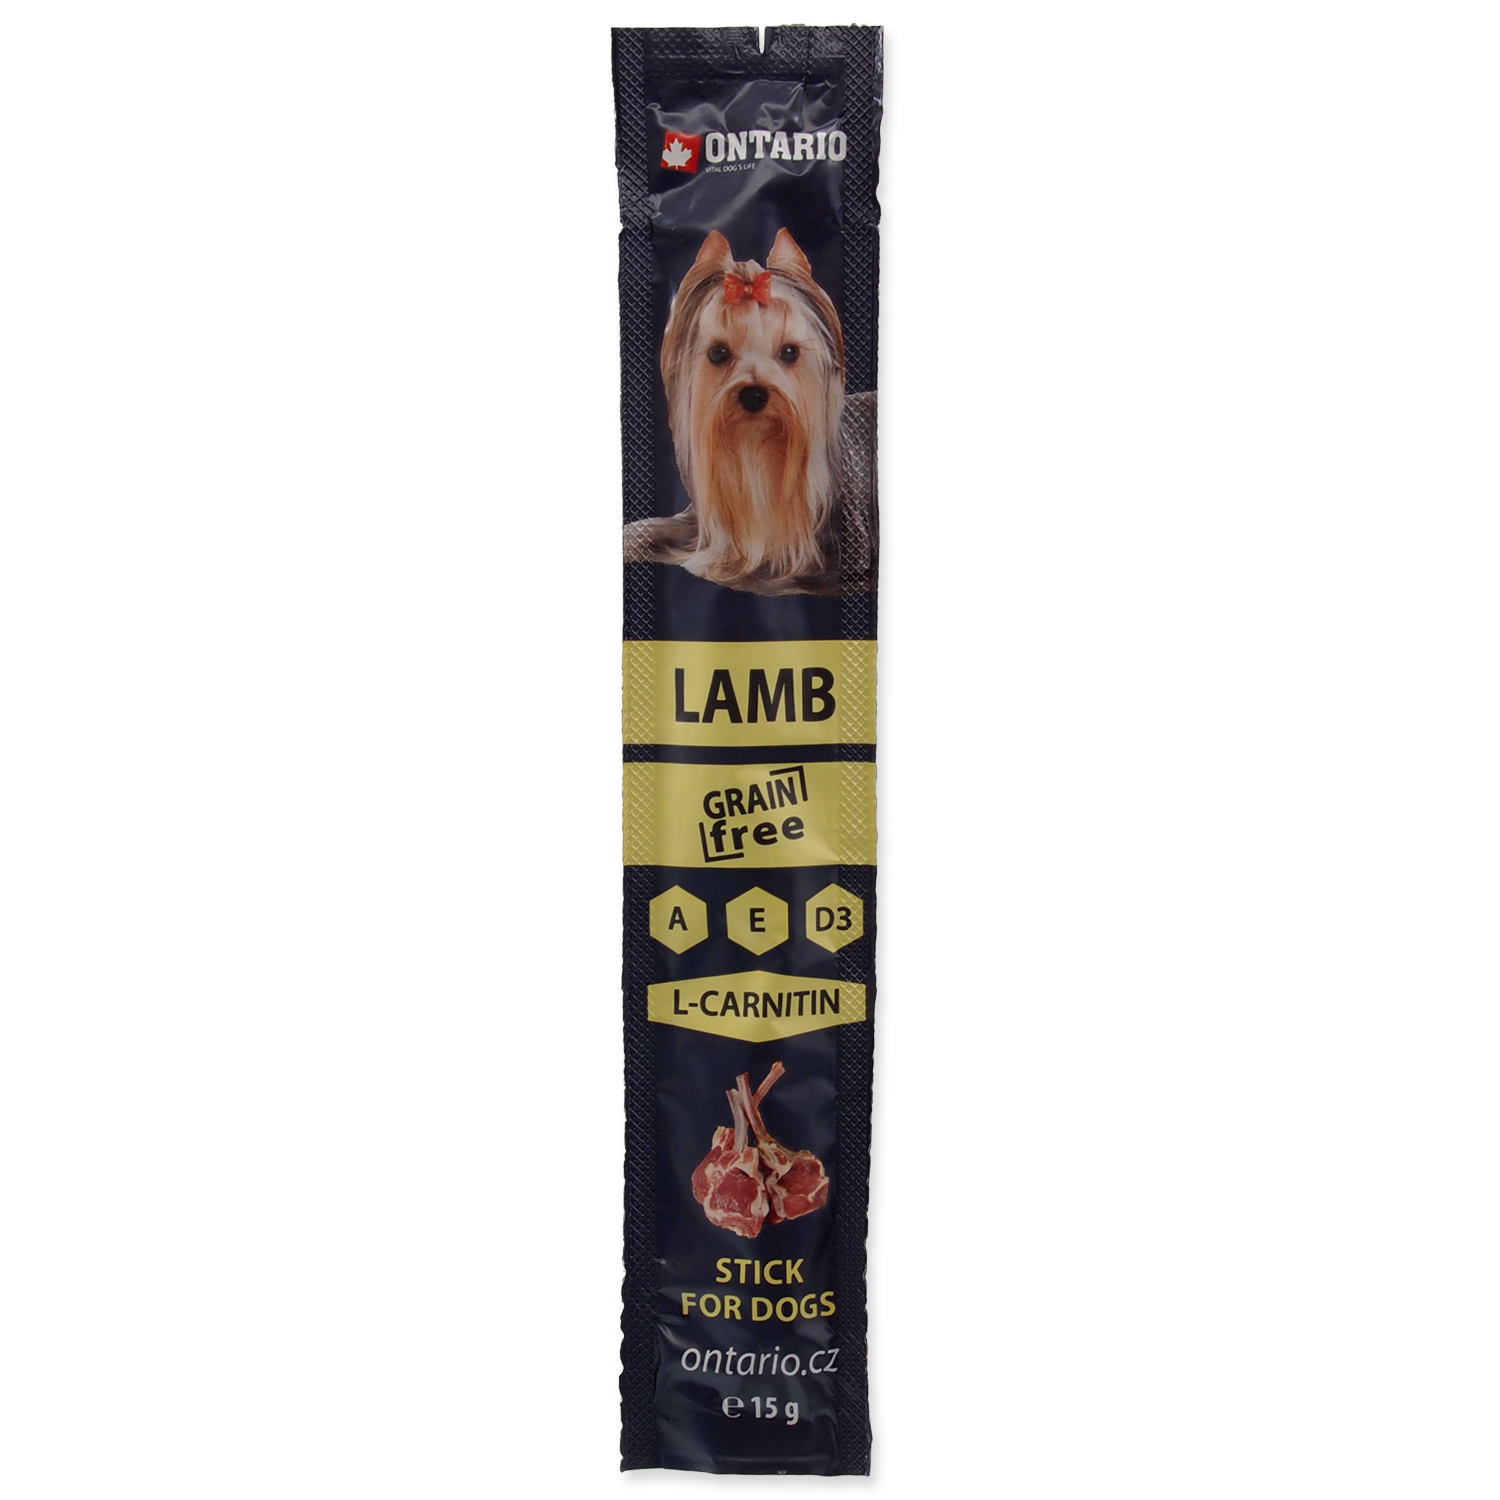 Stick ONTARIO for dogs Lamb (15g)